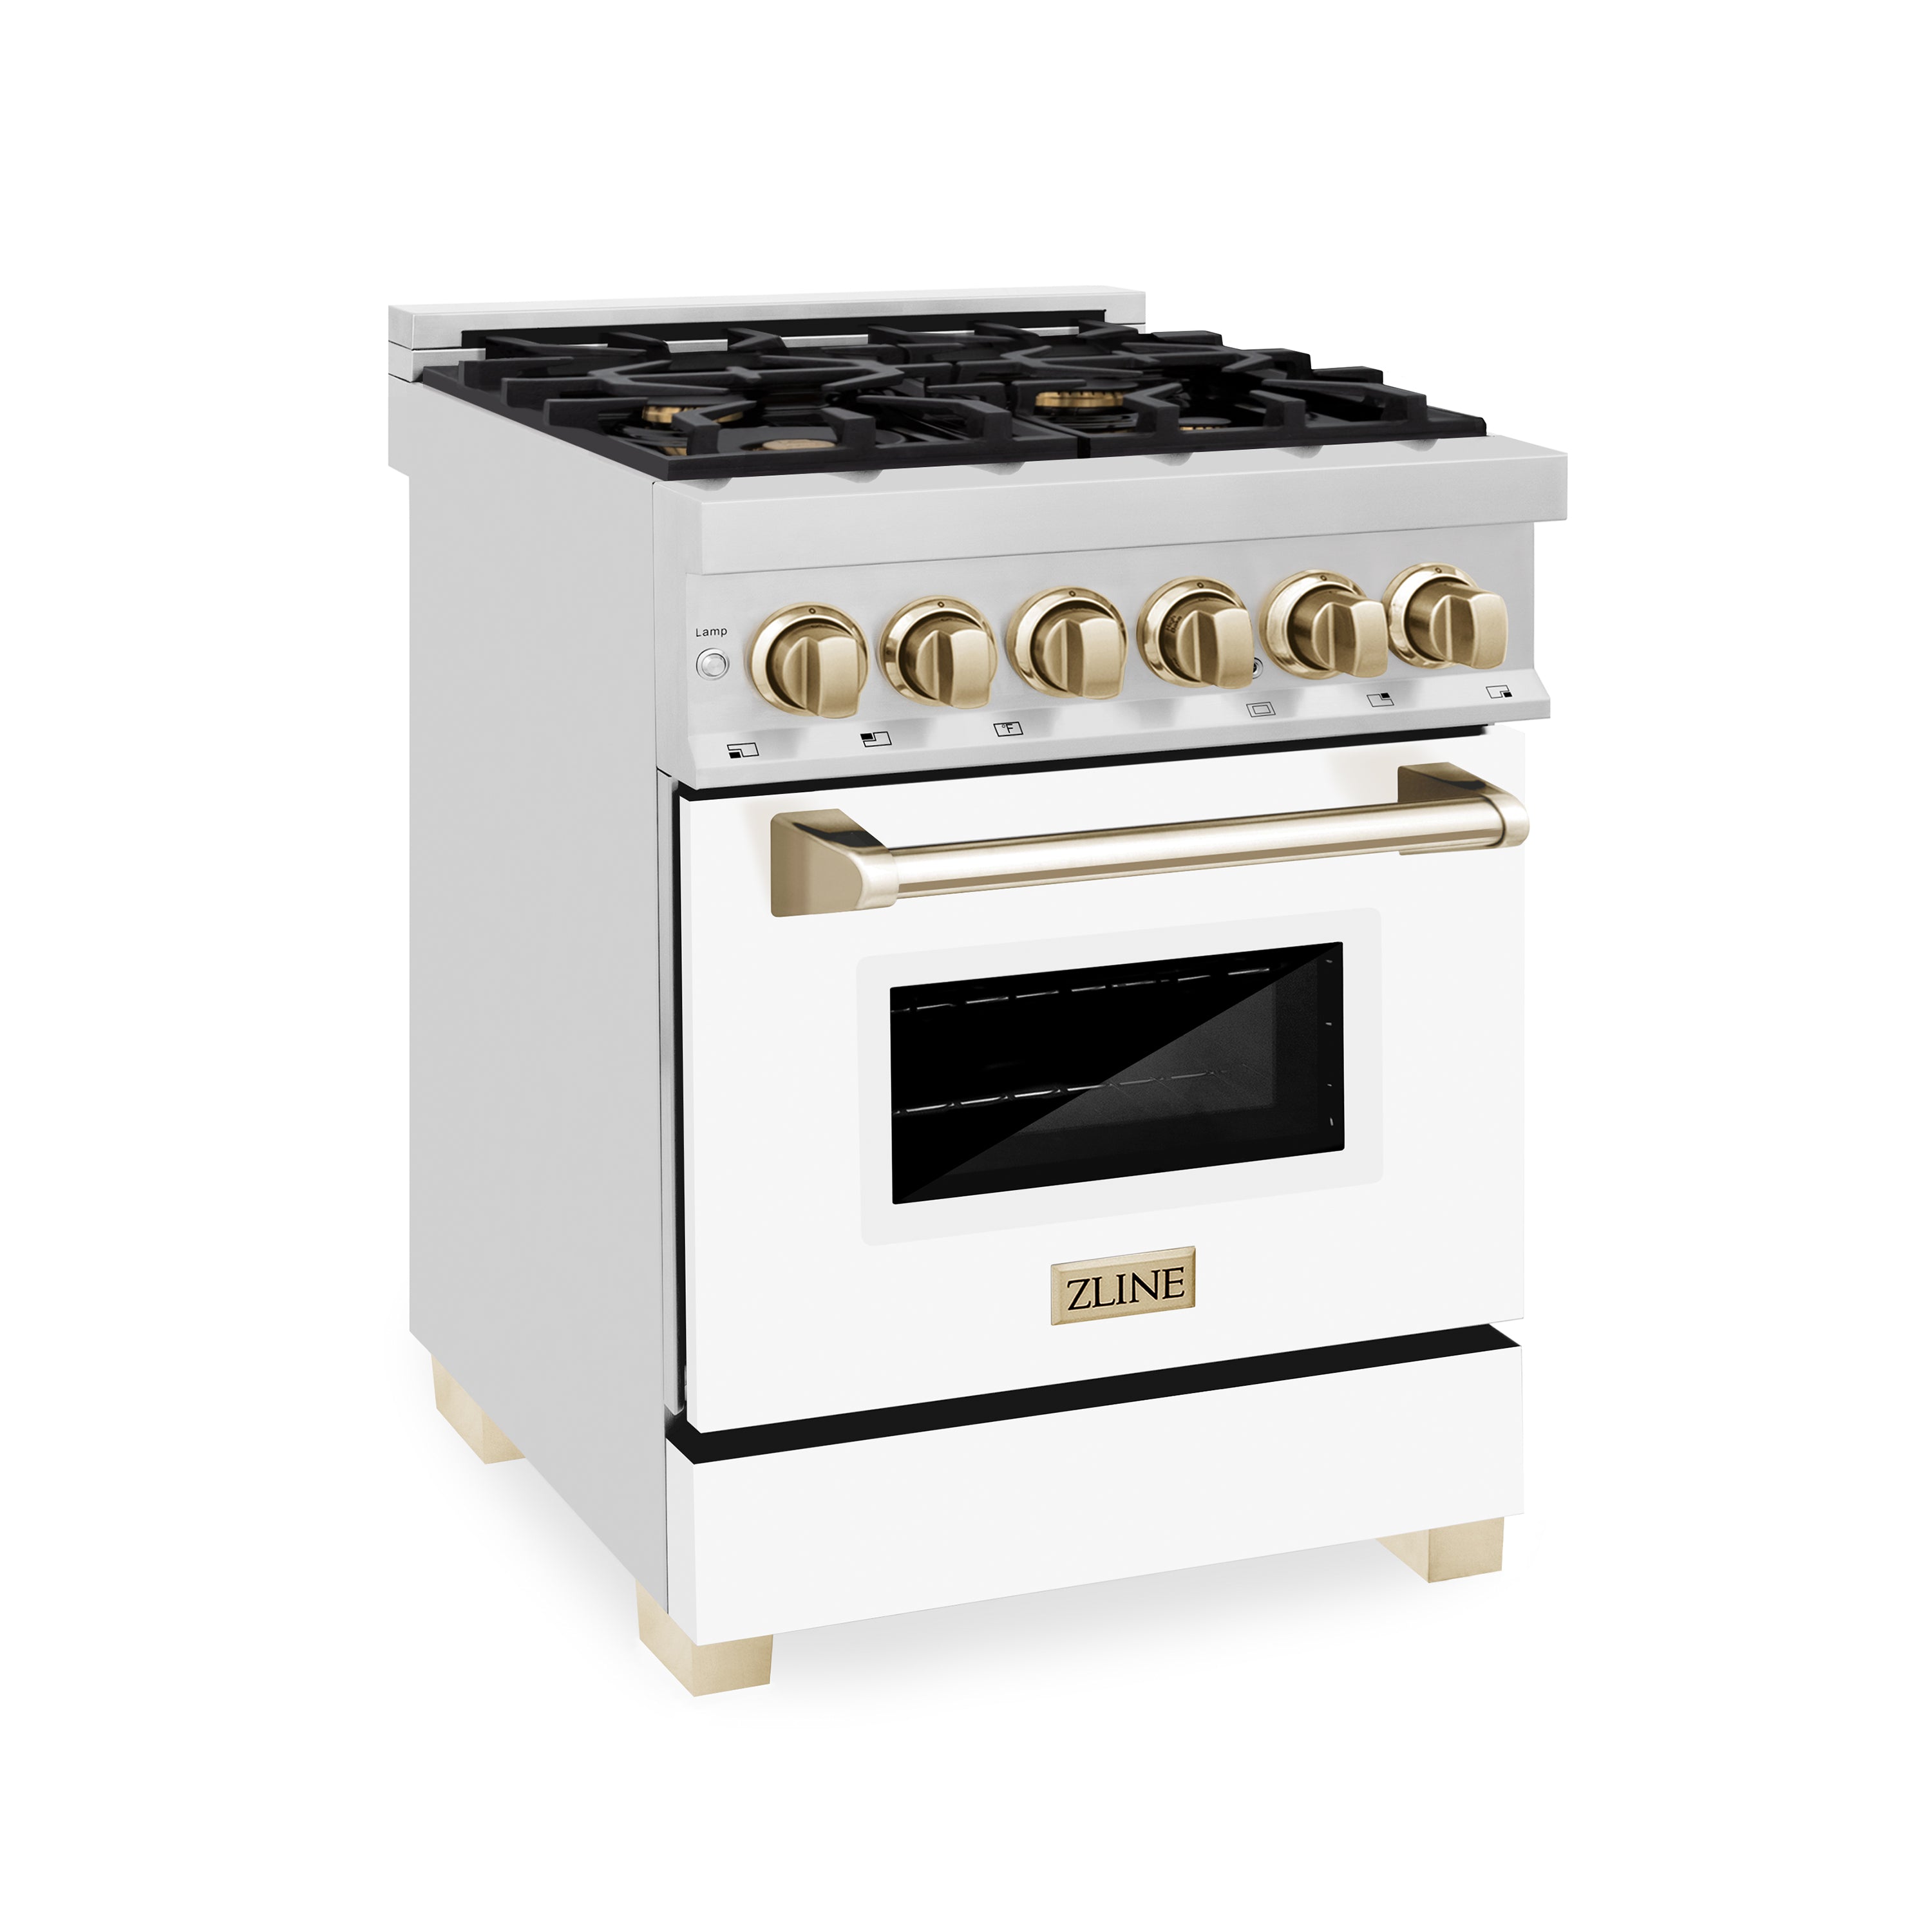 ZLINE Autograph Edition 48 6.0 Cu. ft. Dual Fuel Range in DuraSnow Stainless Steel with White Matte Door and Gold Accents (RASZ-WM-48-G)